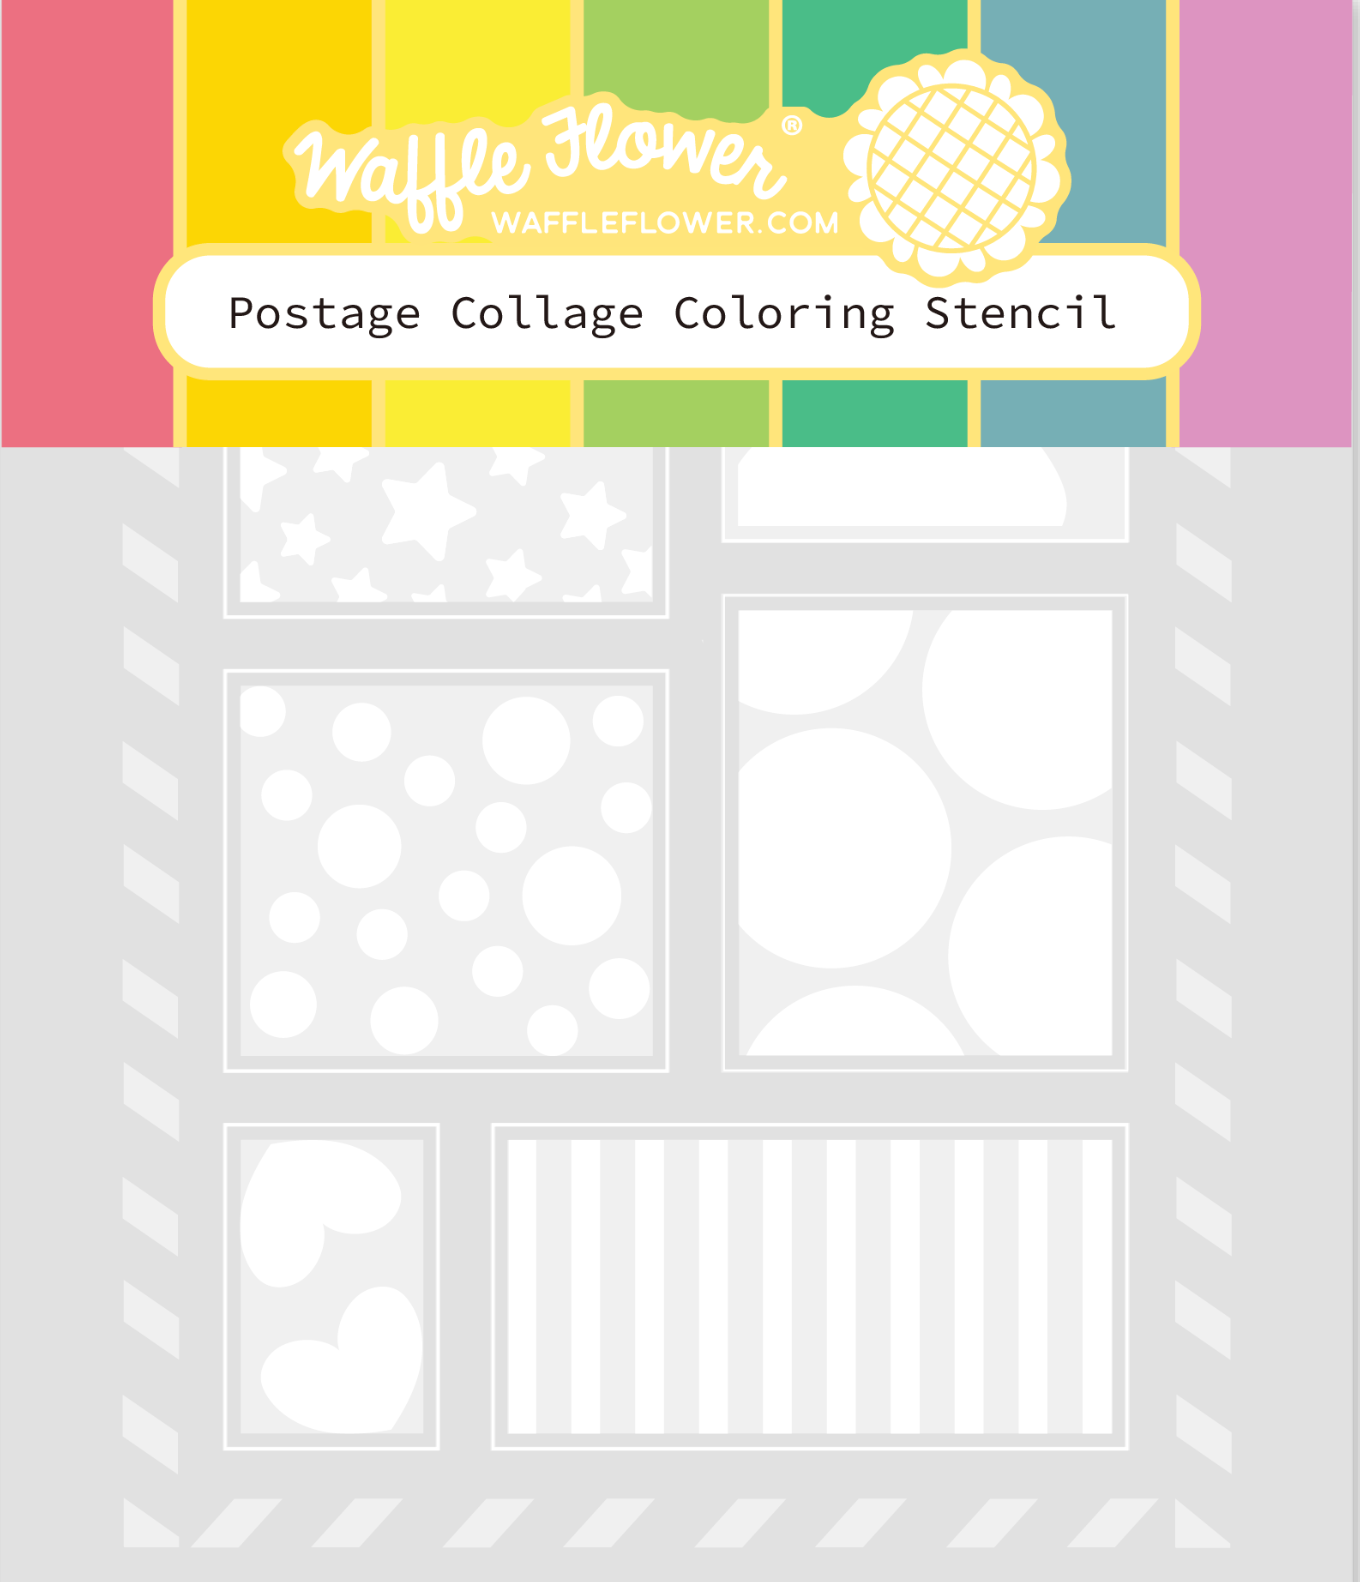 Waffle flower postage collage coloring stencil â simon says stamp